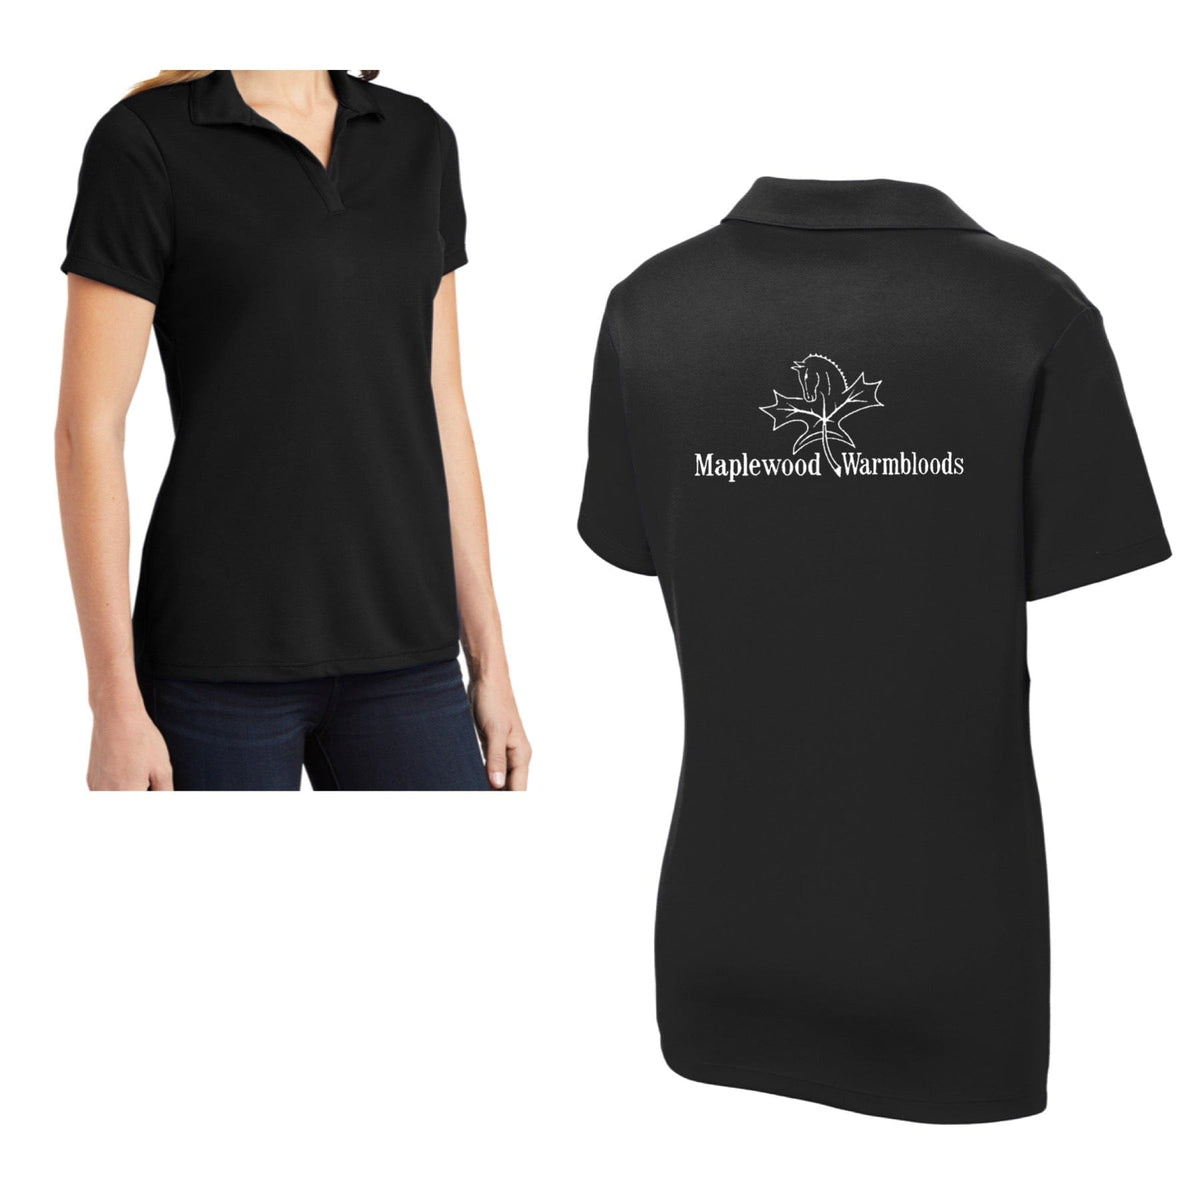 Equestrian Team Apparel Black / XS Maplewood Warmbloods- Men's Polos equestrian team apparel online tack store mobile tack store custom farm apparel custom show stable clothing equestrian lifestyle horse show clothing riding clothes horses equestrian tack store